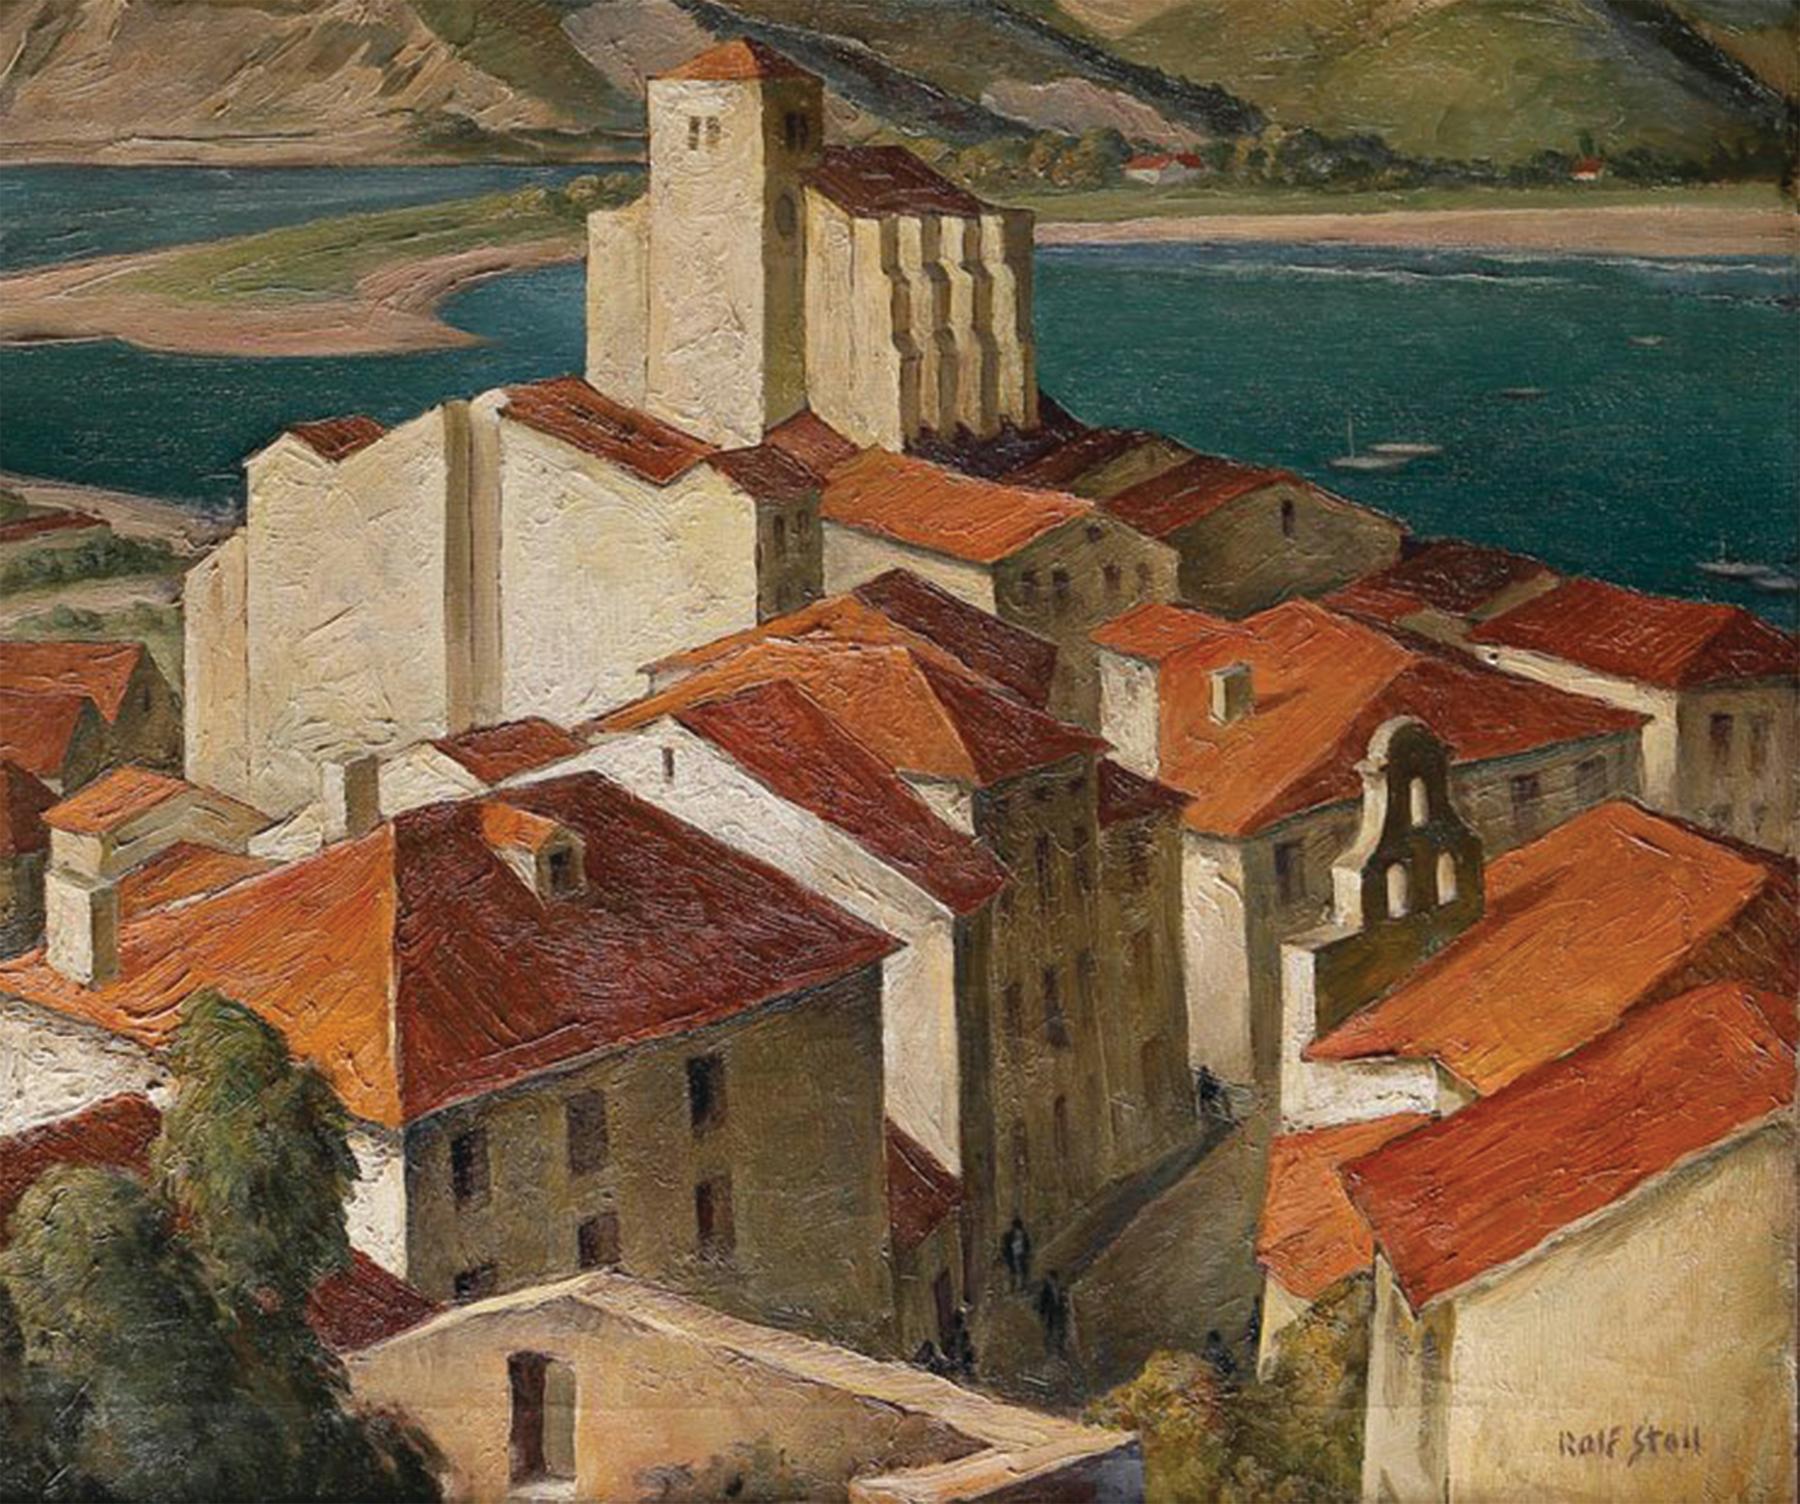 Rolf Stoll (American, 1892-1978)
Spanish Seaside Village (Cadaques Catalonia)
Oil on canvas
Signed lower right
28 x 38 inches
Exhibited: The 11th Annual May Show, Cleveland Museum of Art, 1929

Rolf Stoll, a painter of figure subjects, landscapes